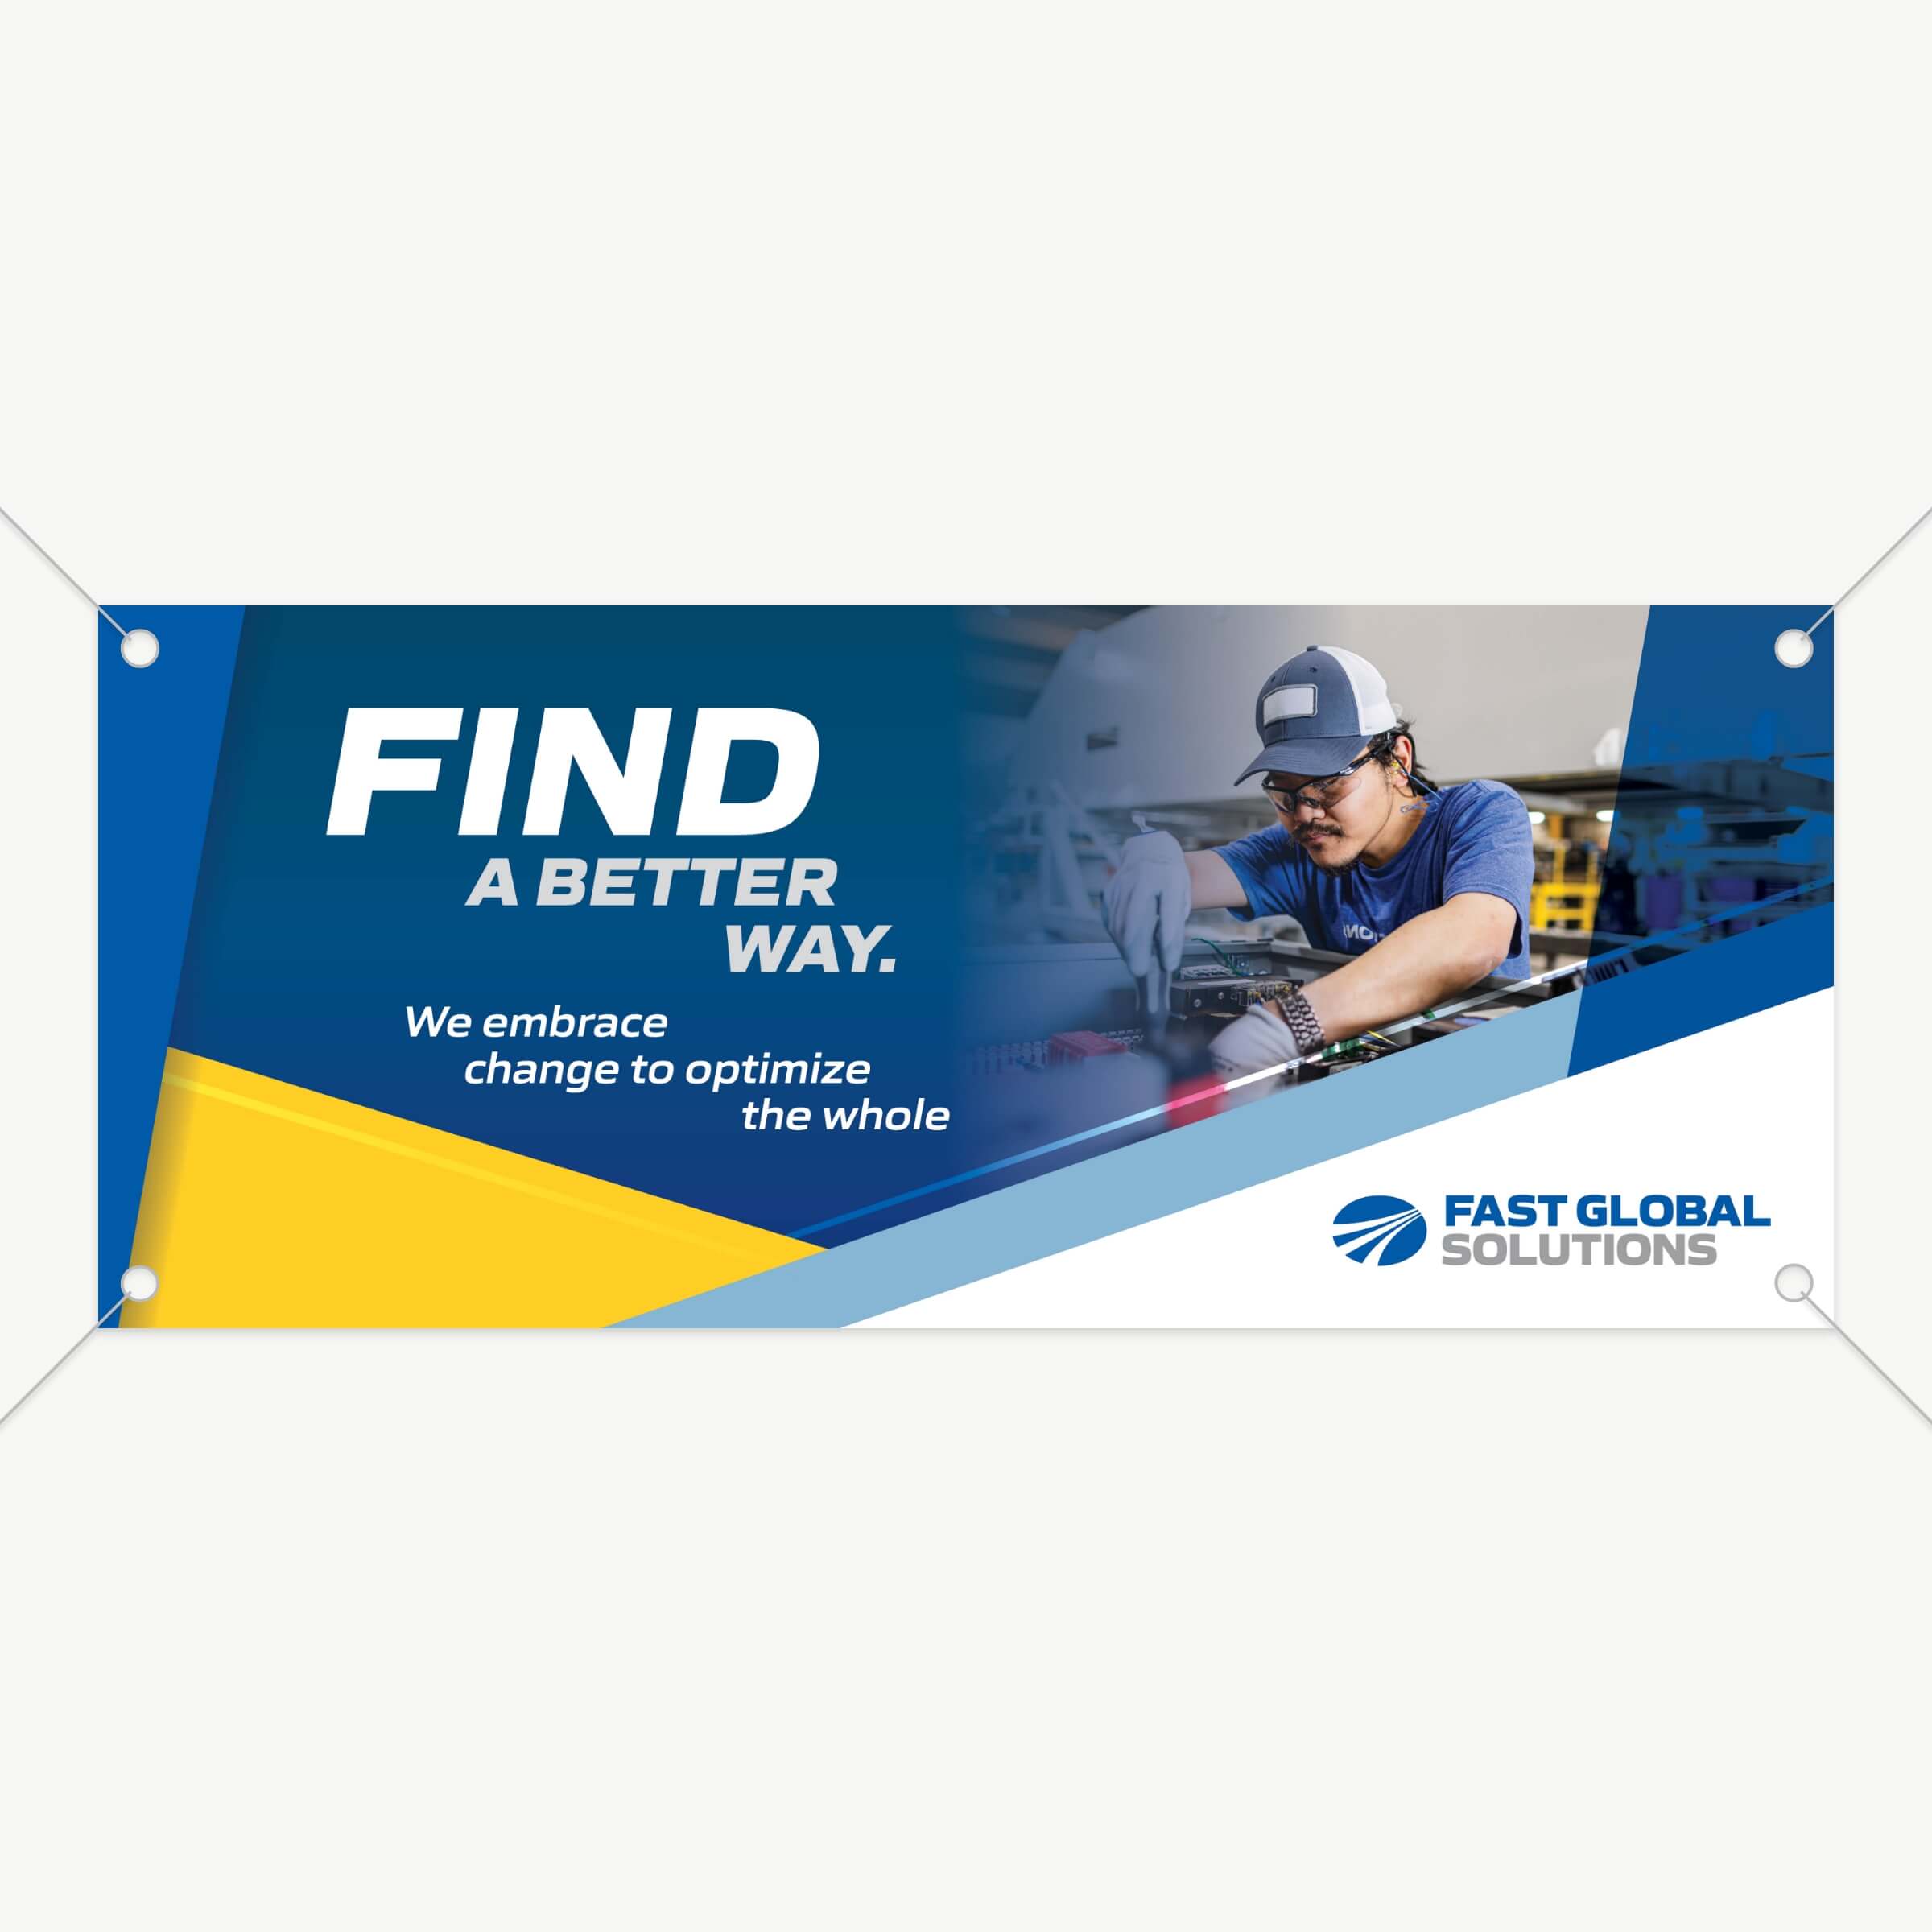 A horizontal banner featuring an employee image and one of the company values.